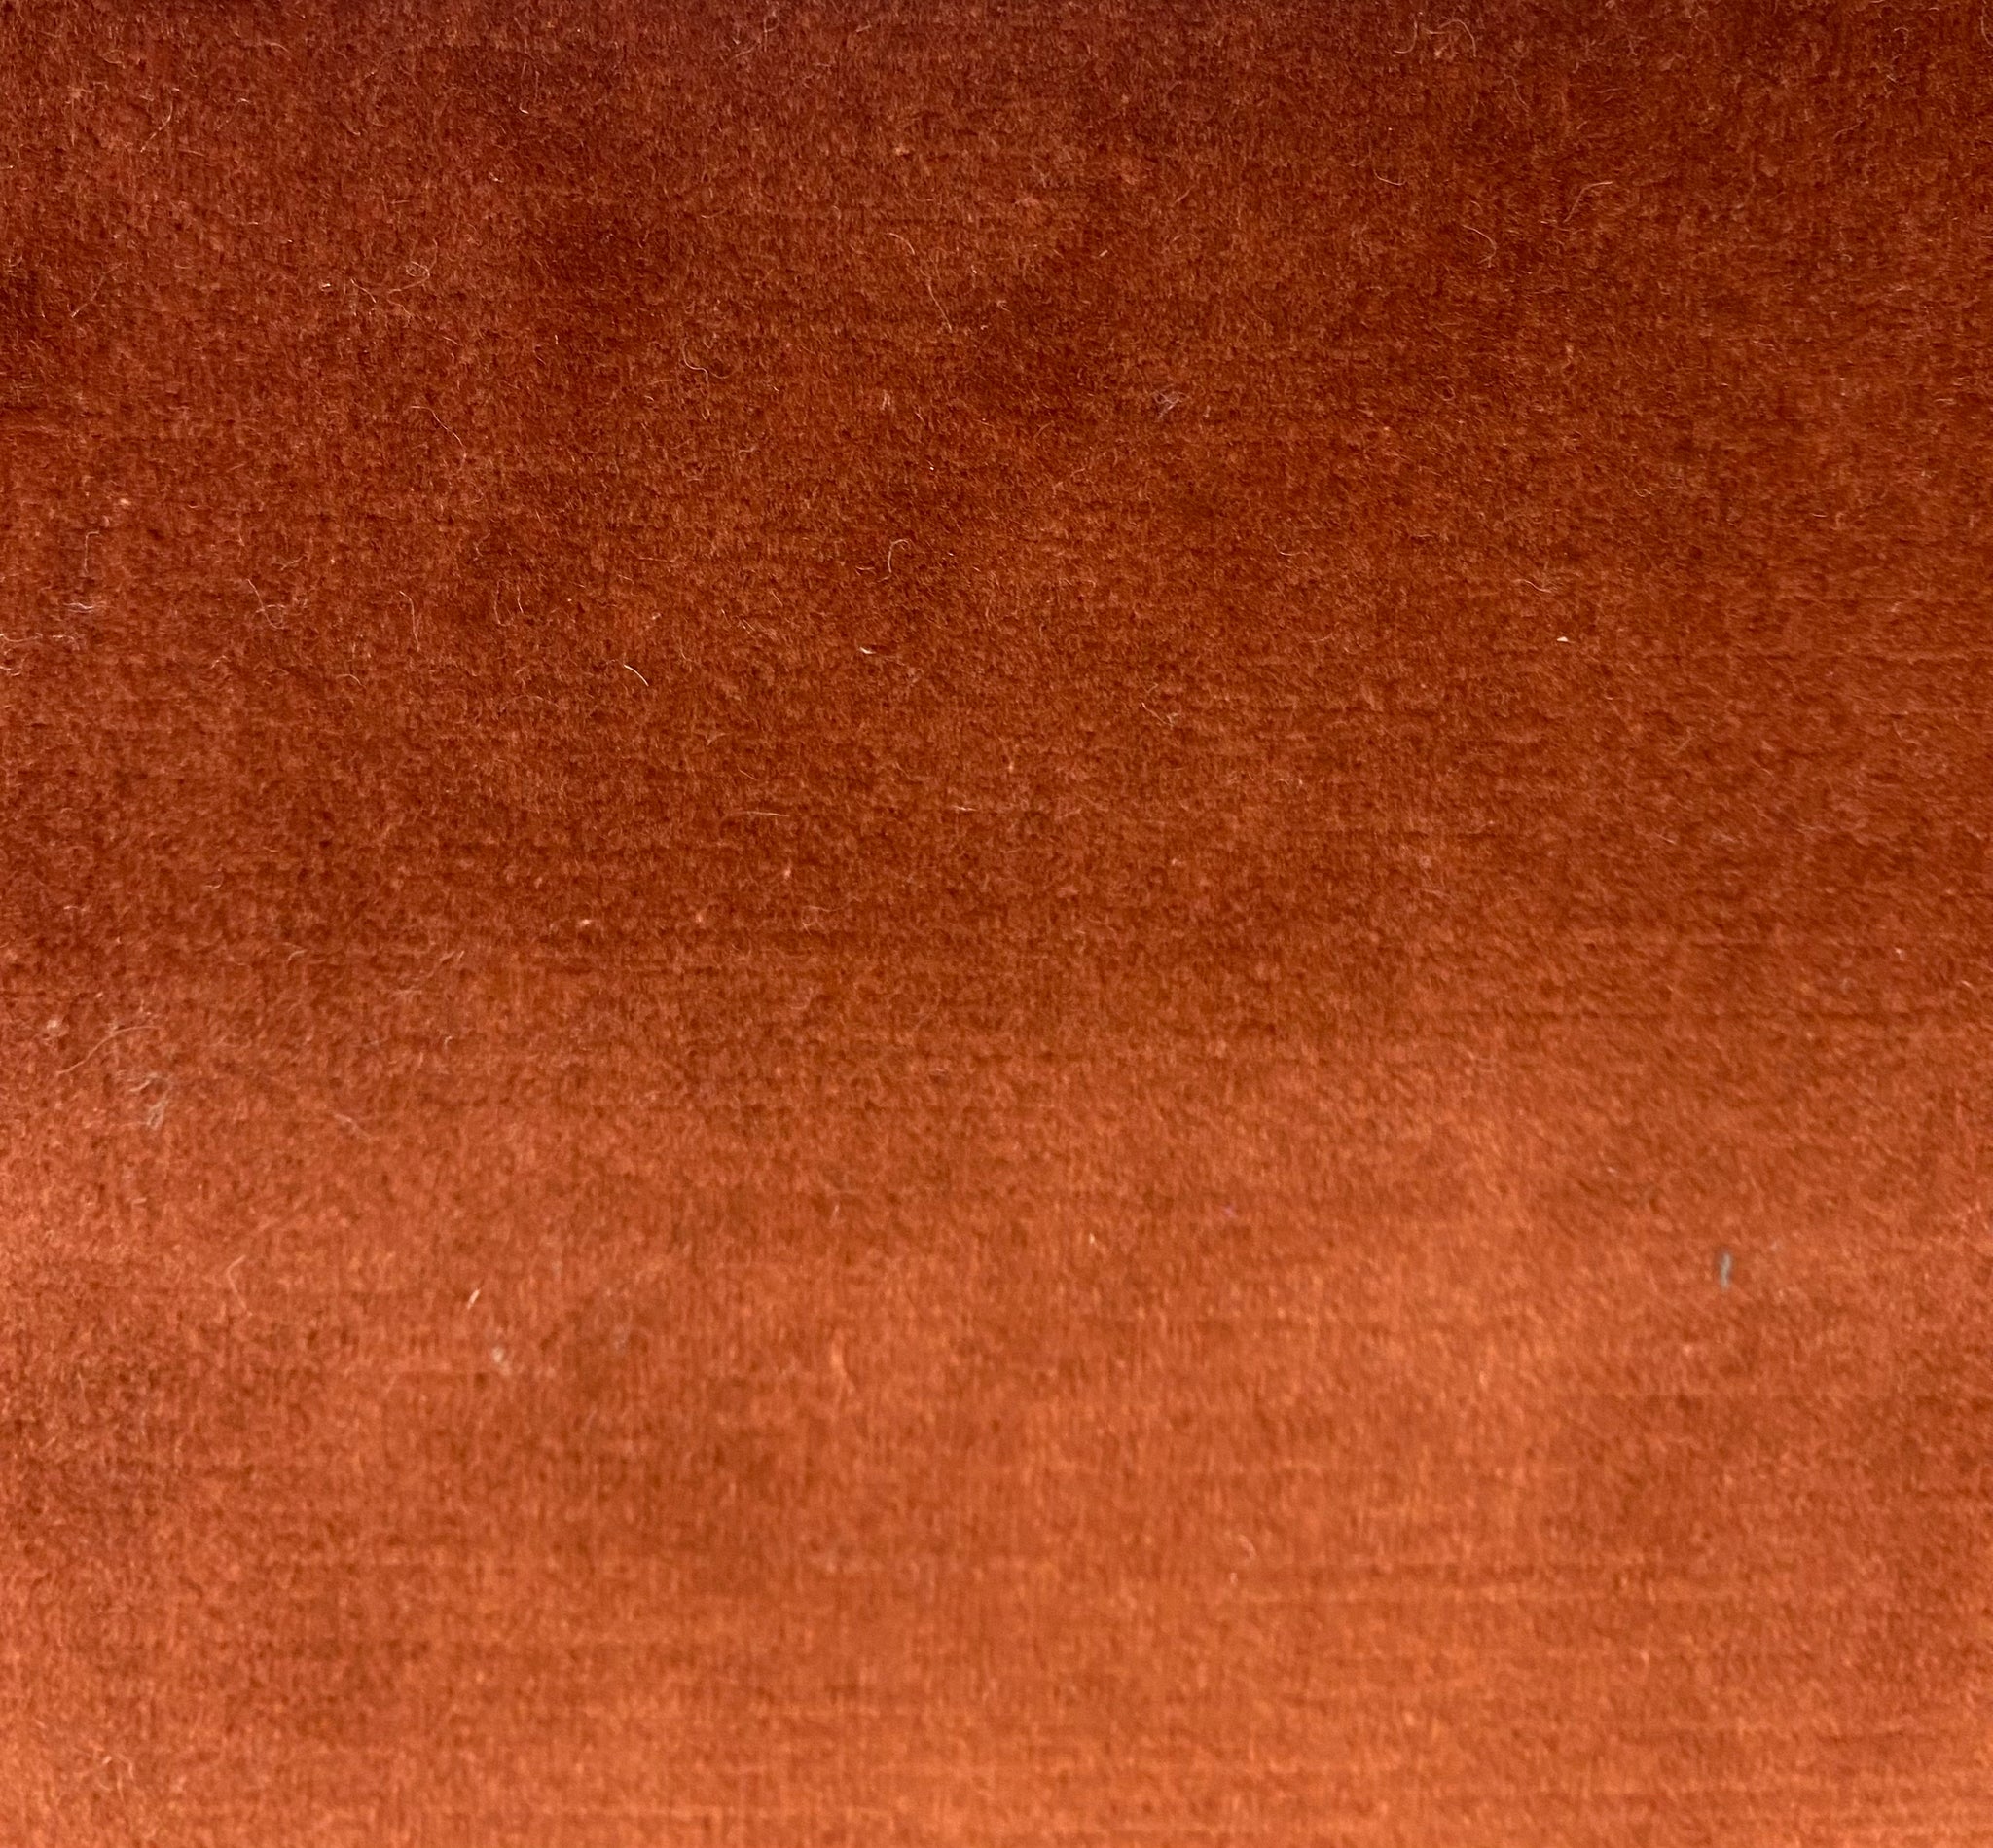 GLORIA COPPER Solid Color Cotton Velvet Upholstery And Drapery Fabric